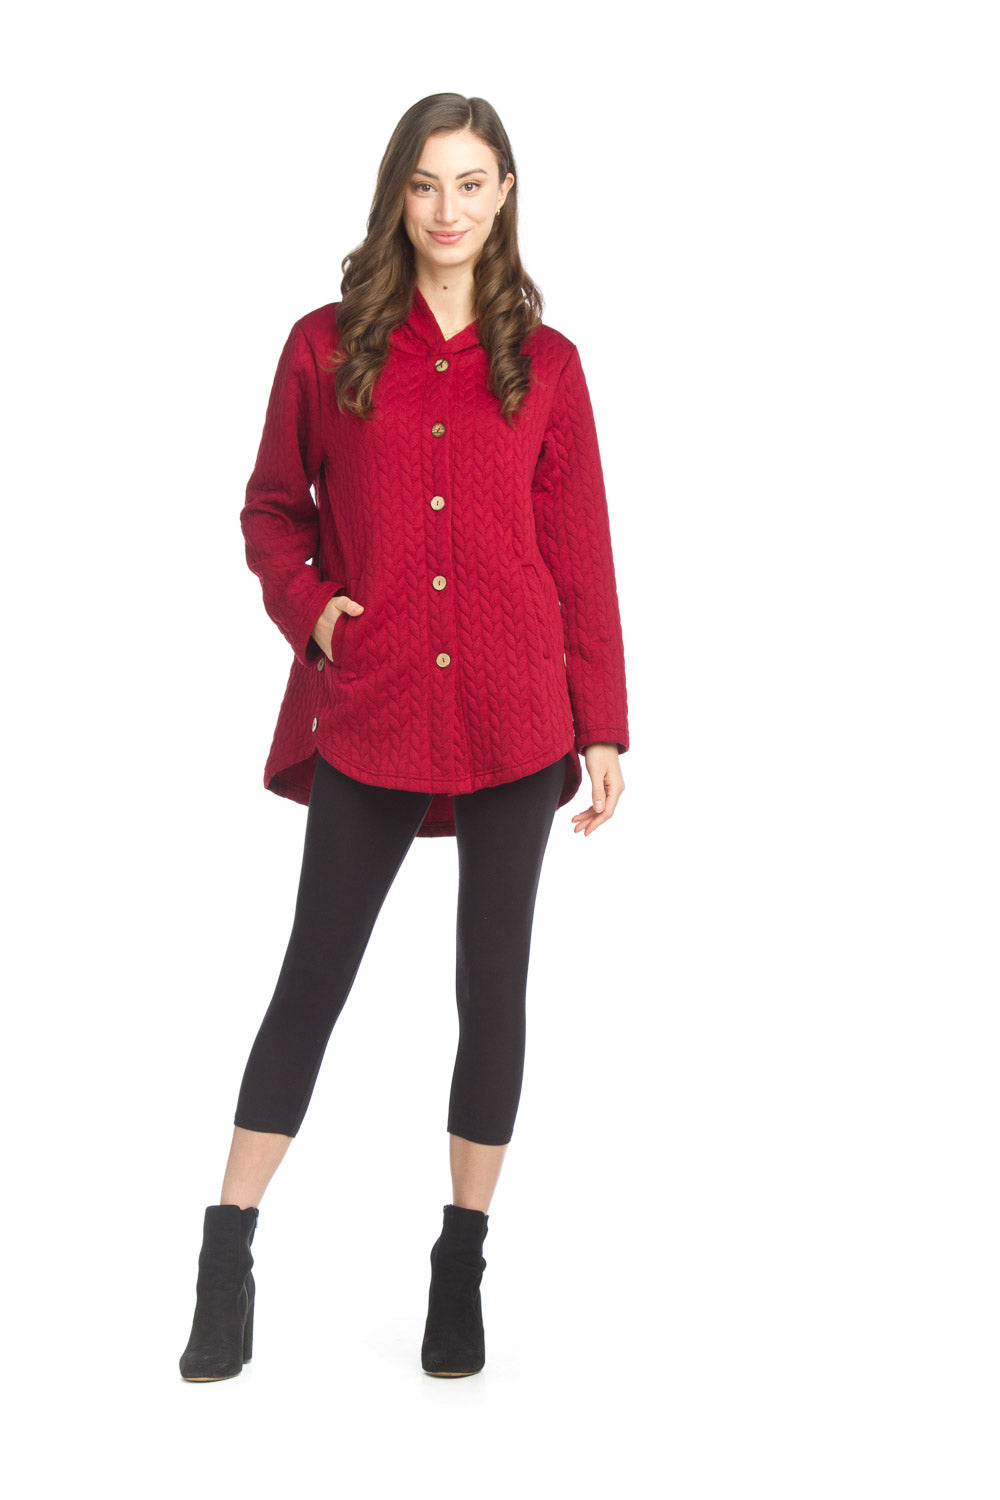 JT-15722 - Cable Knit Aline Hooded Jacket